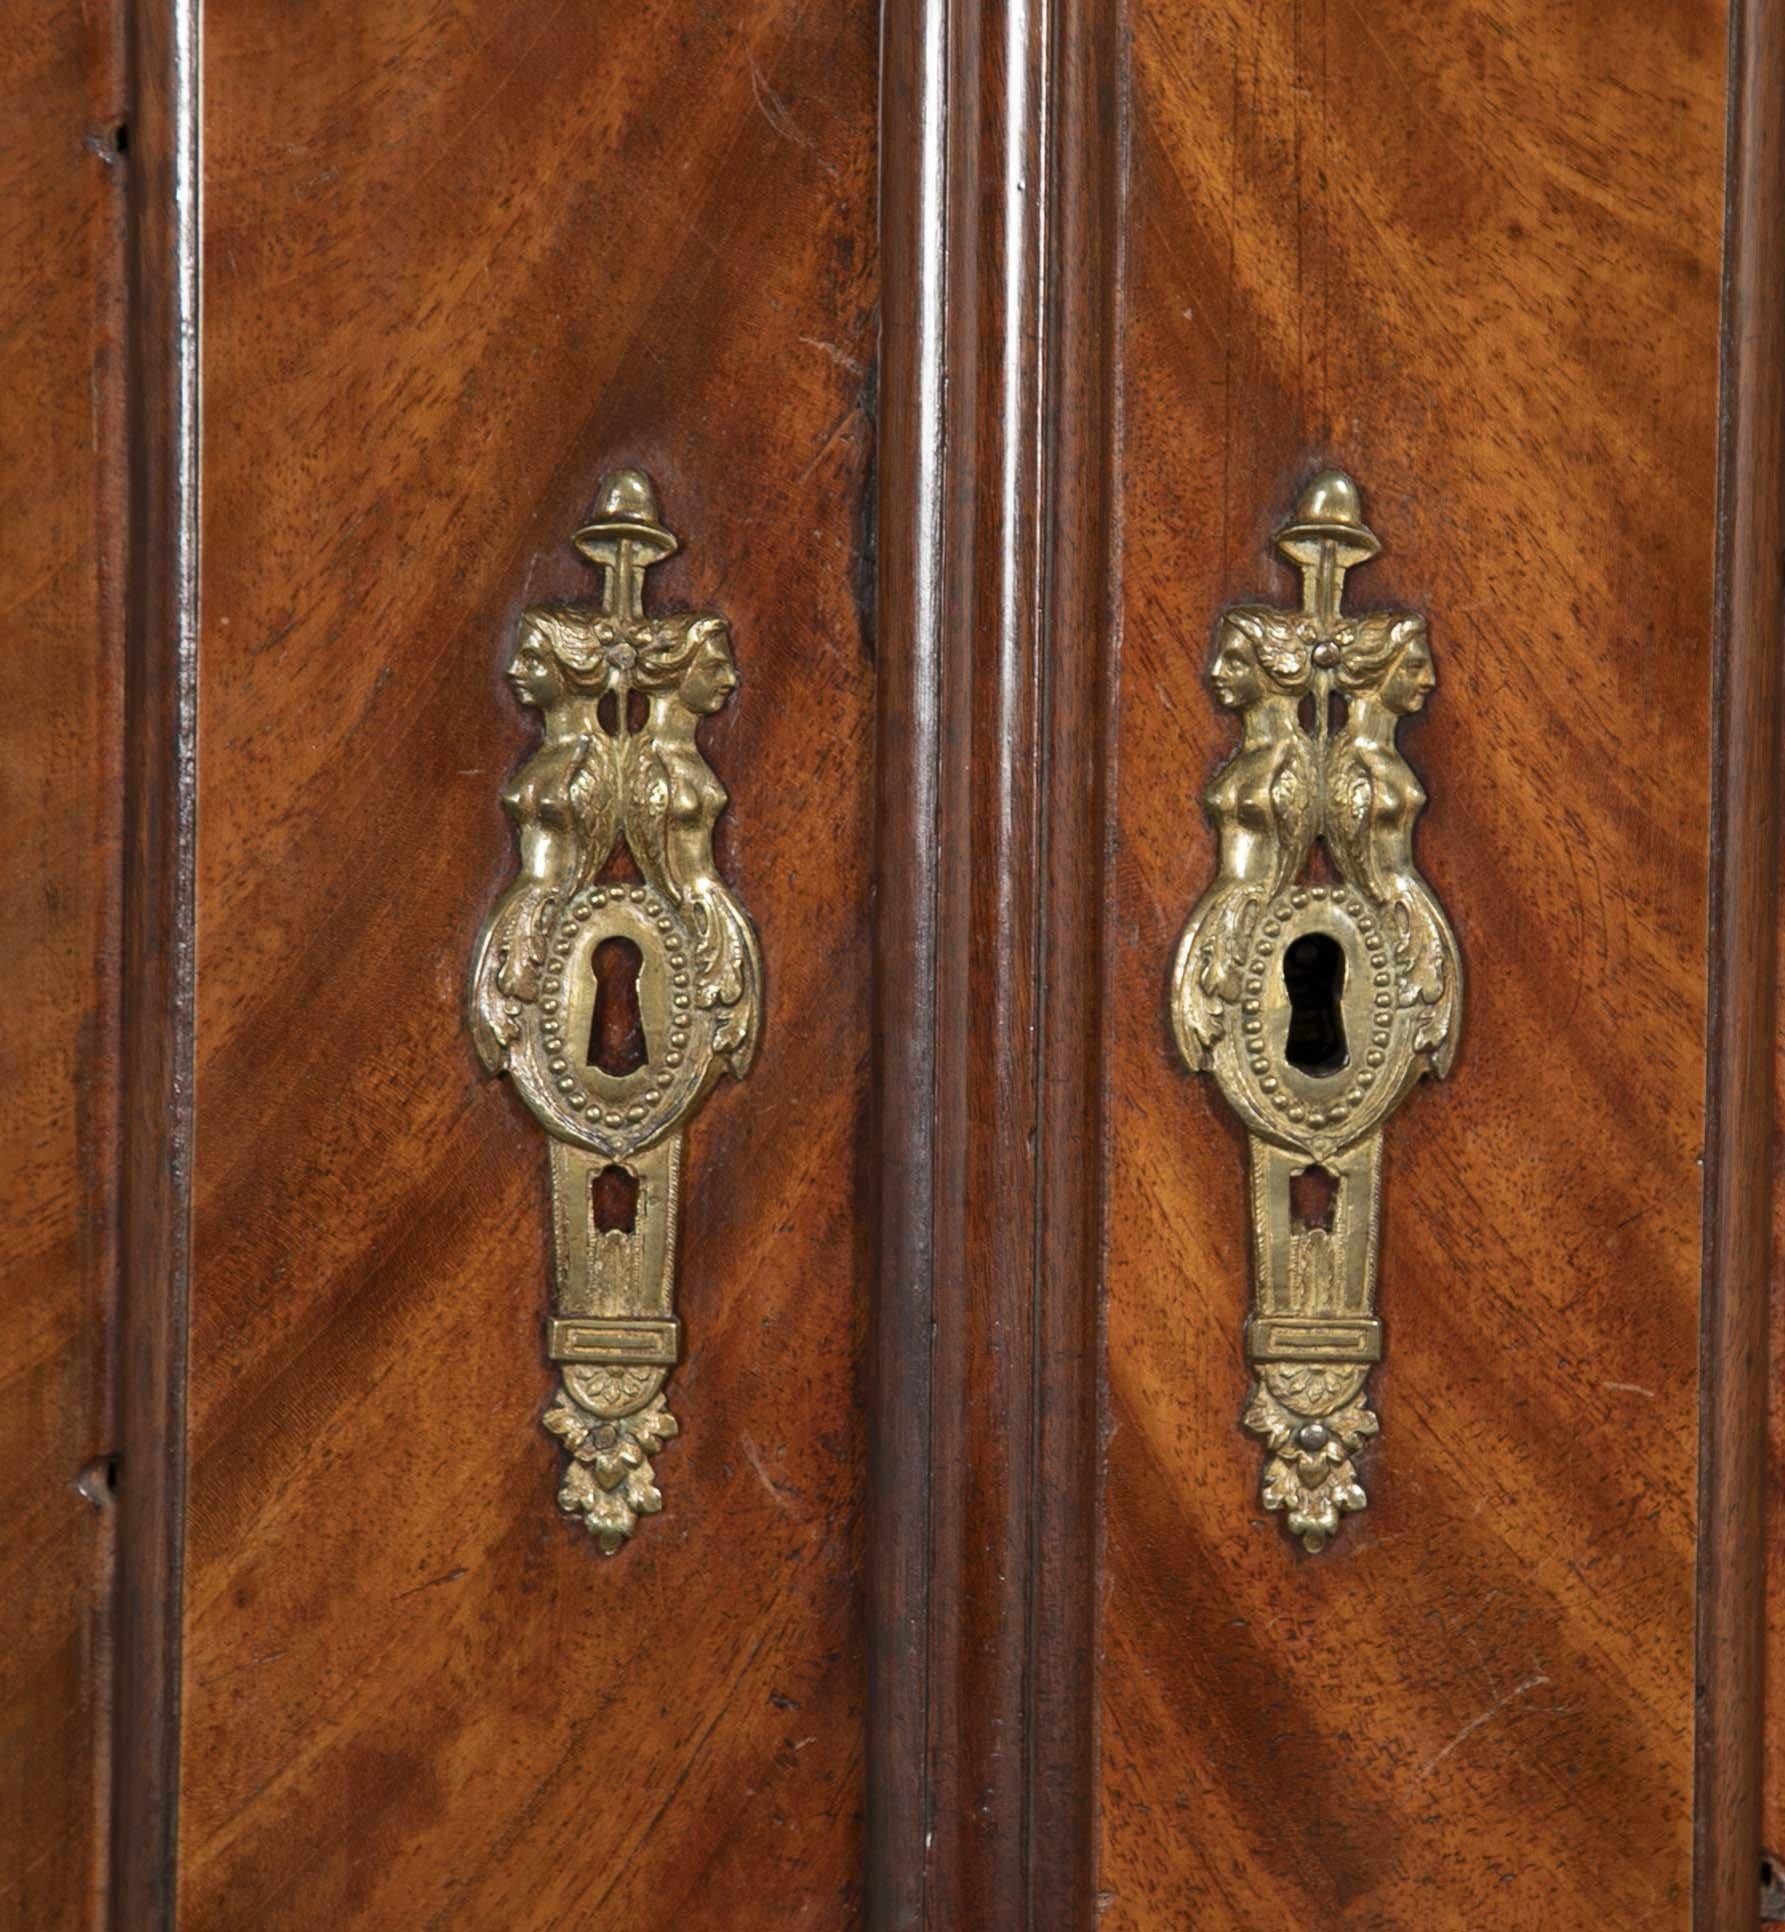 18th Century Dutch Linen Press In Good Condition For Sale In New York City, NY